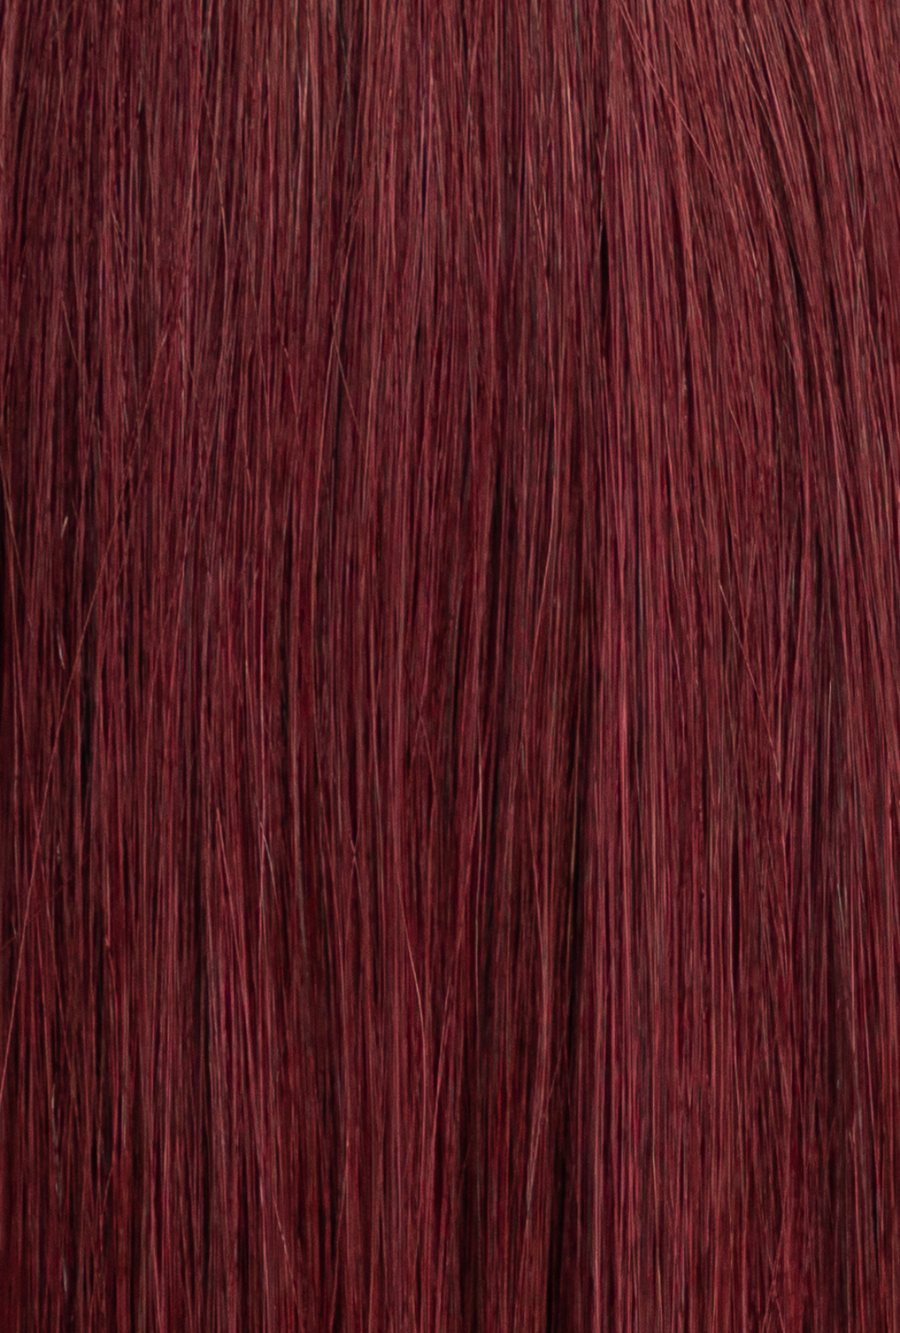 Laced Hair Tape-In Extensions #99J (Red Red Wine)